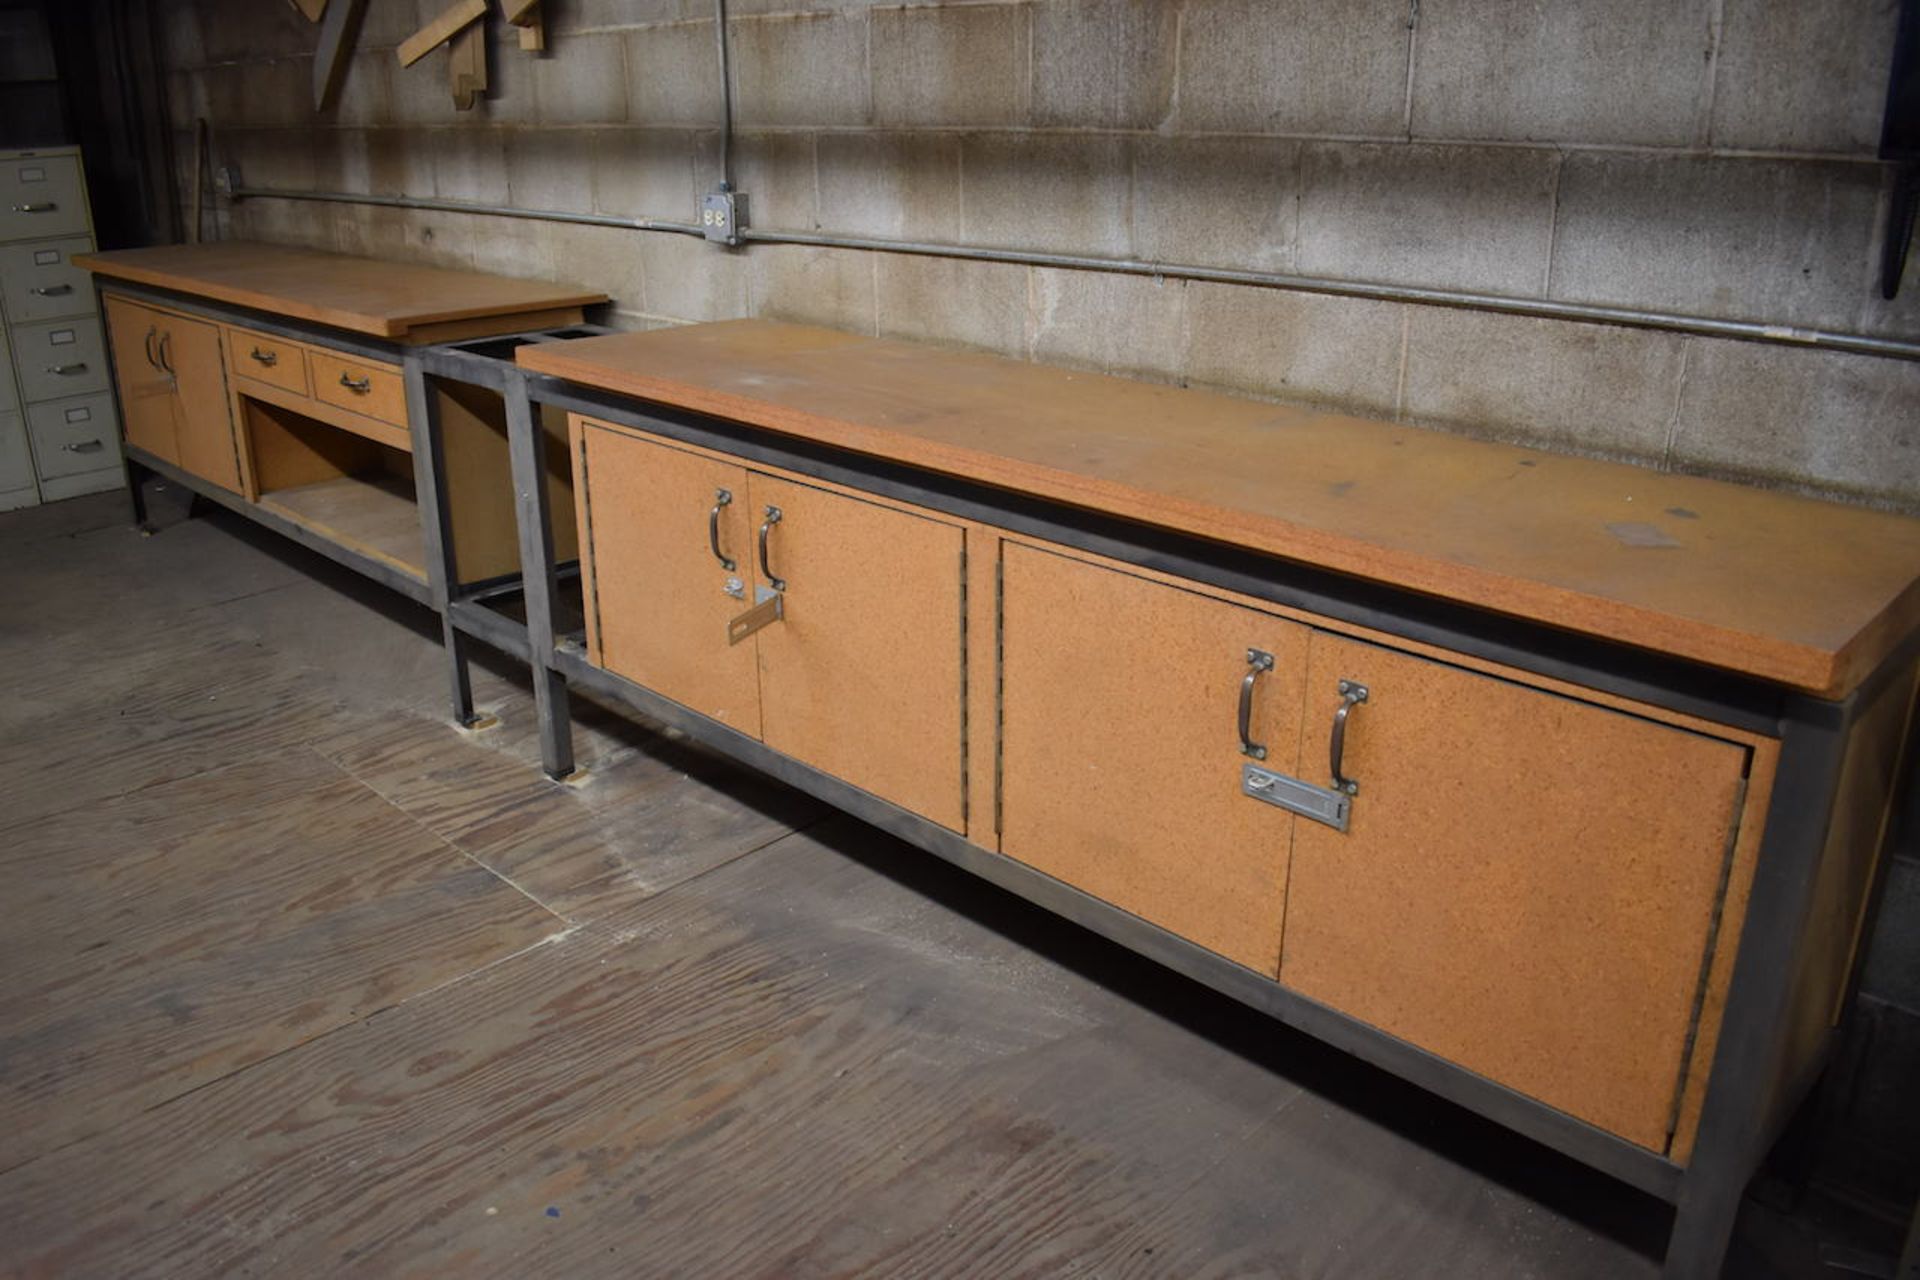 ASSORTED WORK BENCHES, FILE CABINETS, METAL SHELVING AND STORAGE CABINETS IN UPSTAIRS MEZZANINE. ( - Image 4 of 9